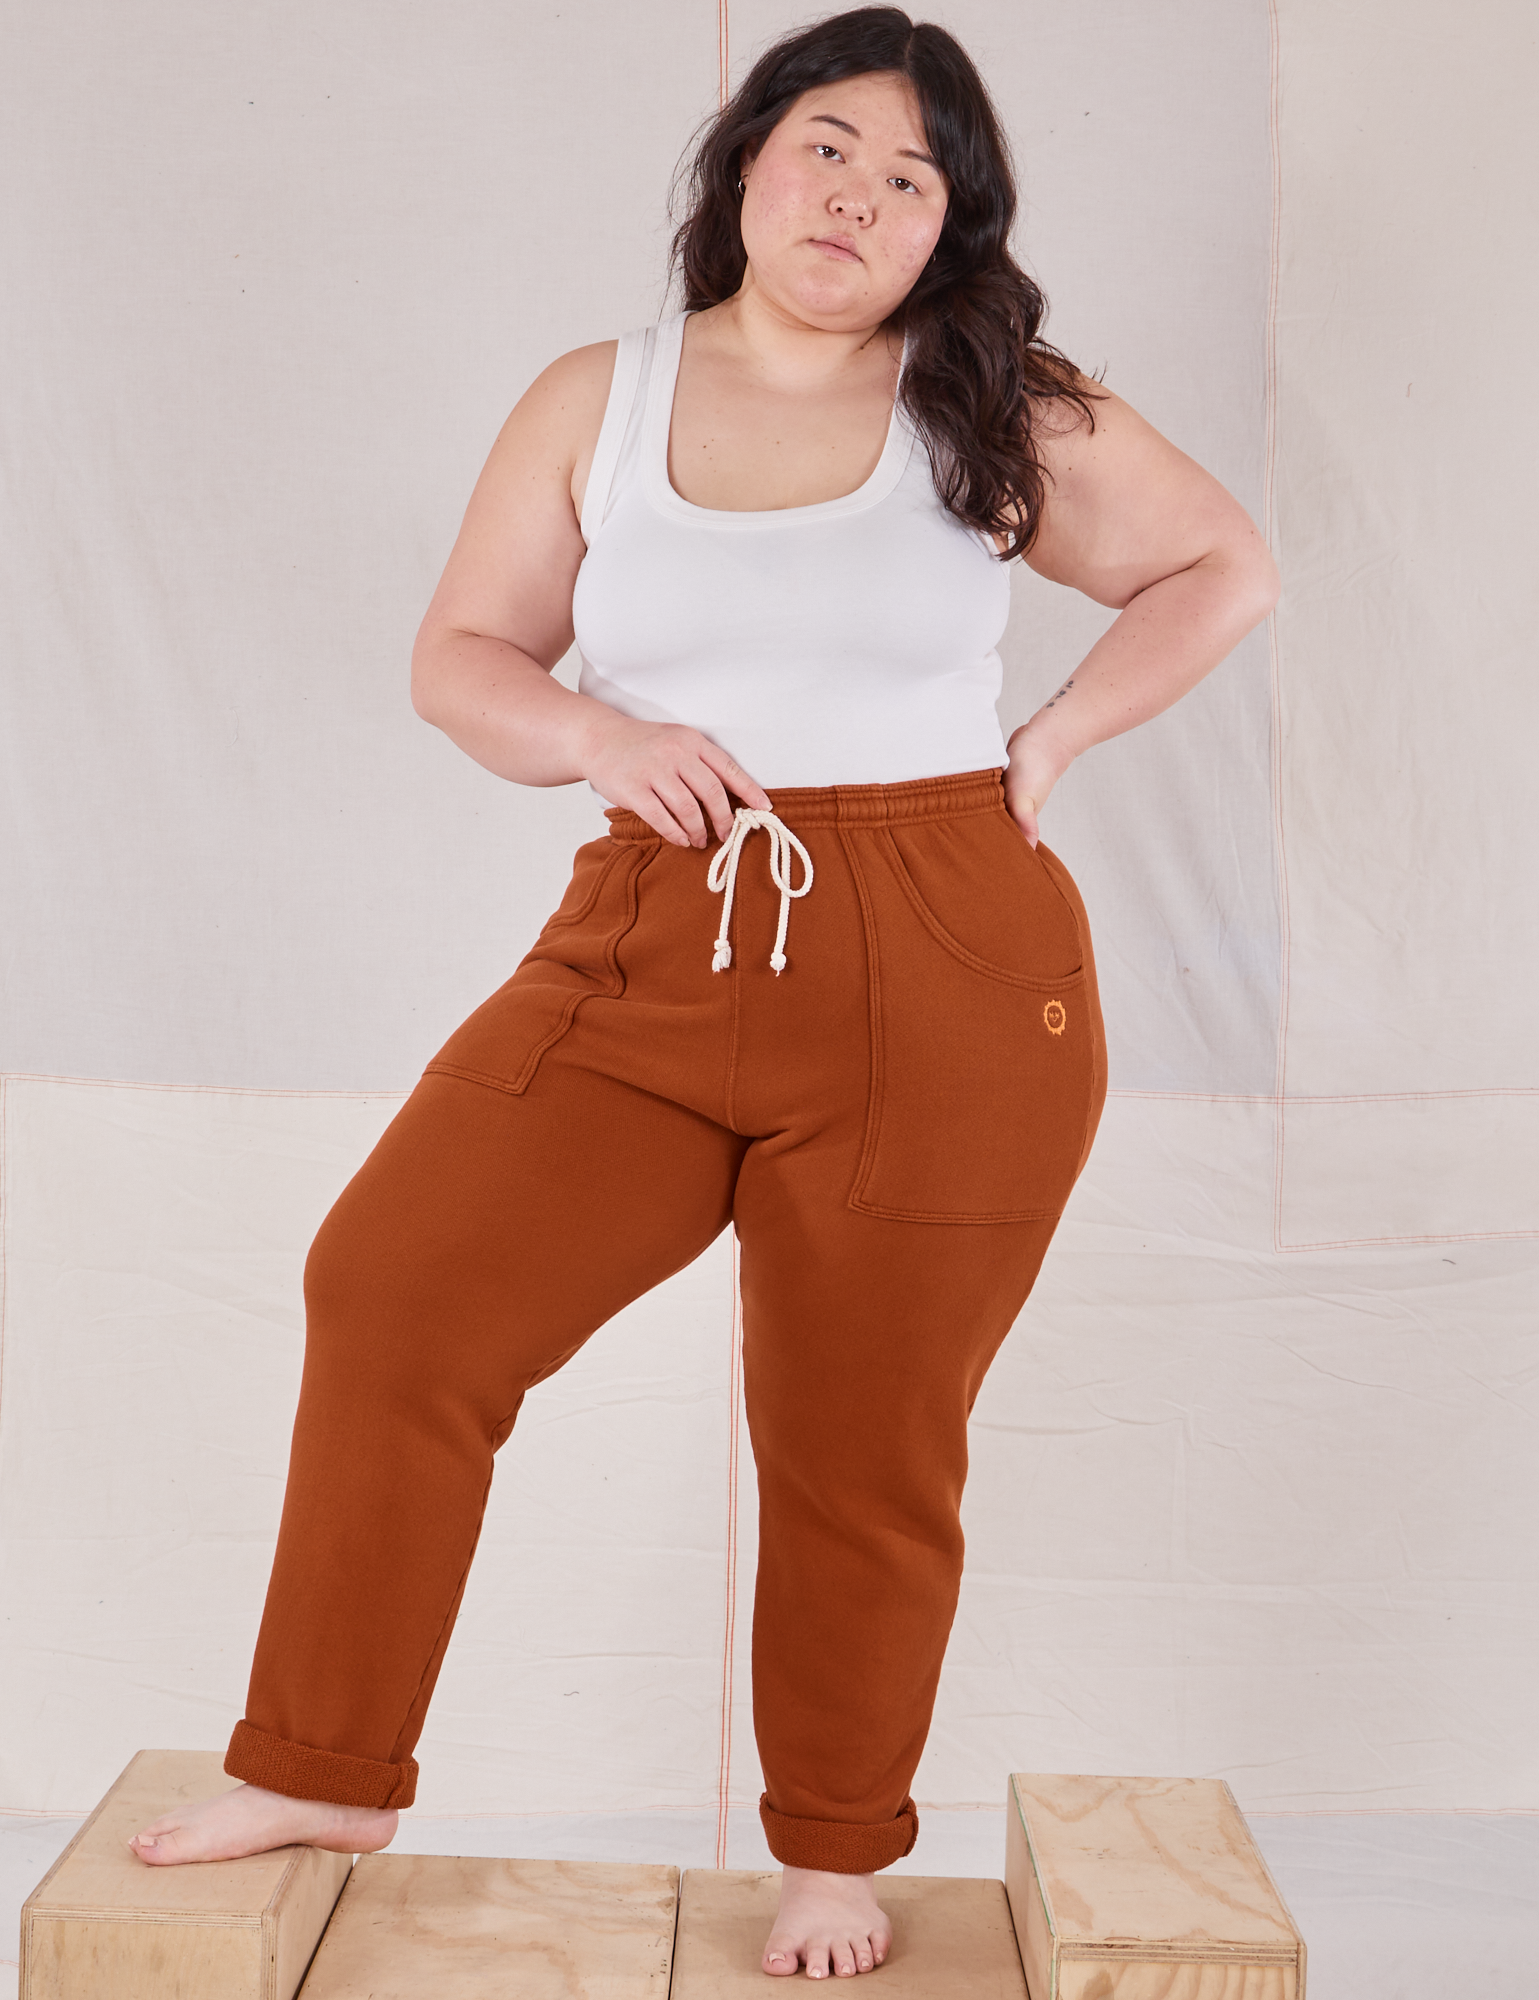 Ashley is 5&#39;7&quot; and wearing L Rolled Cuff Sweat Pants in Burnt Terracotta paired with vintage off-white Cropped Tank Top